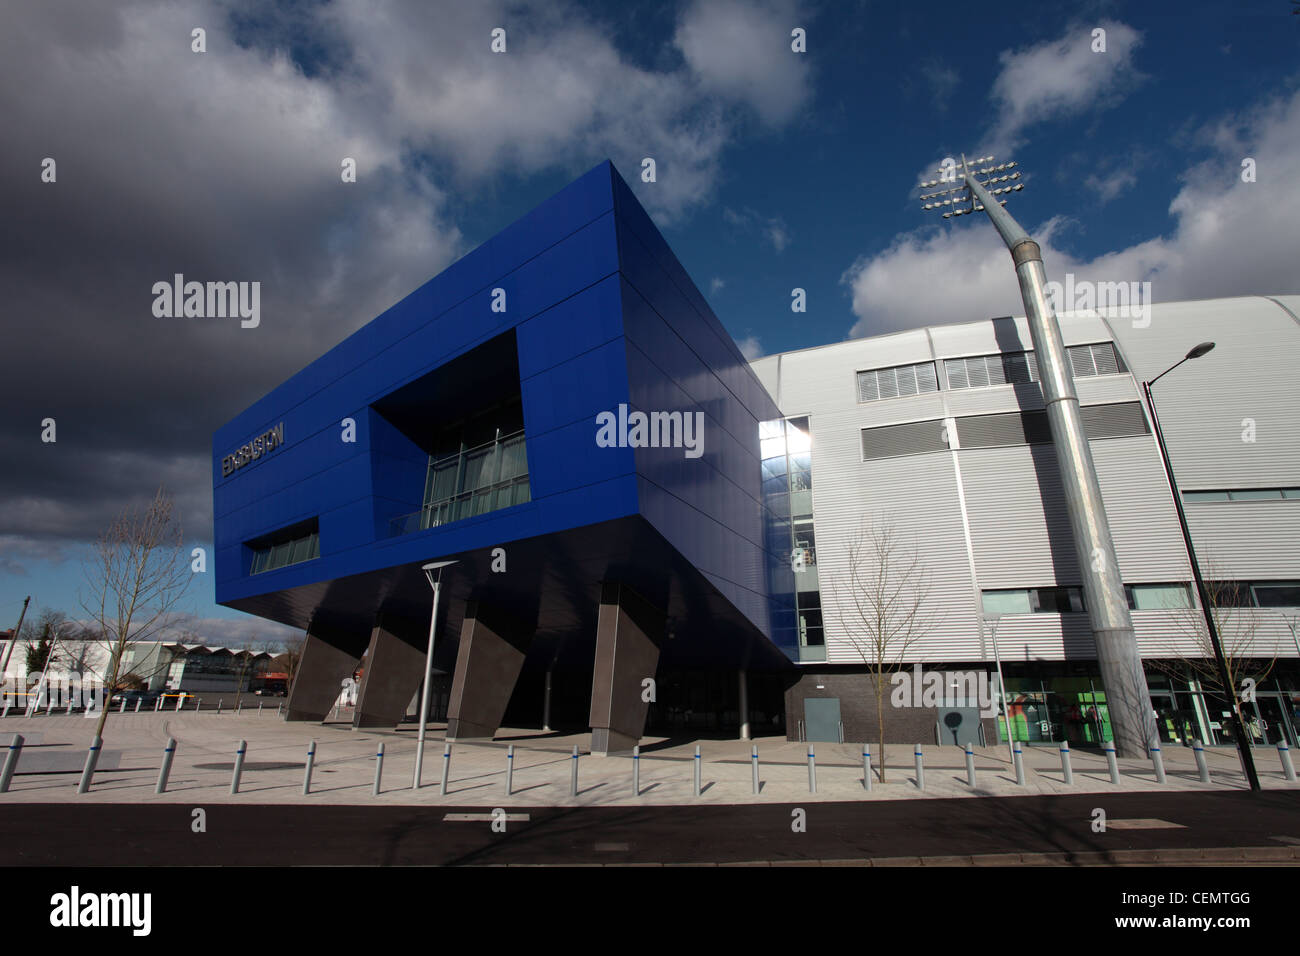 The architecture of the Edgbaston Cricket Ground, Birmingham, UK, the home ground for Warwickshire County Cricket Club. Stock Photo